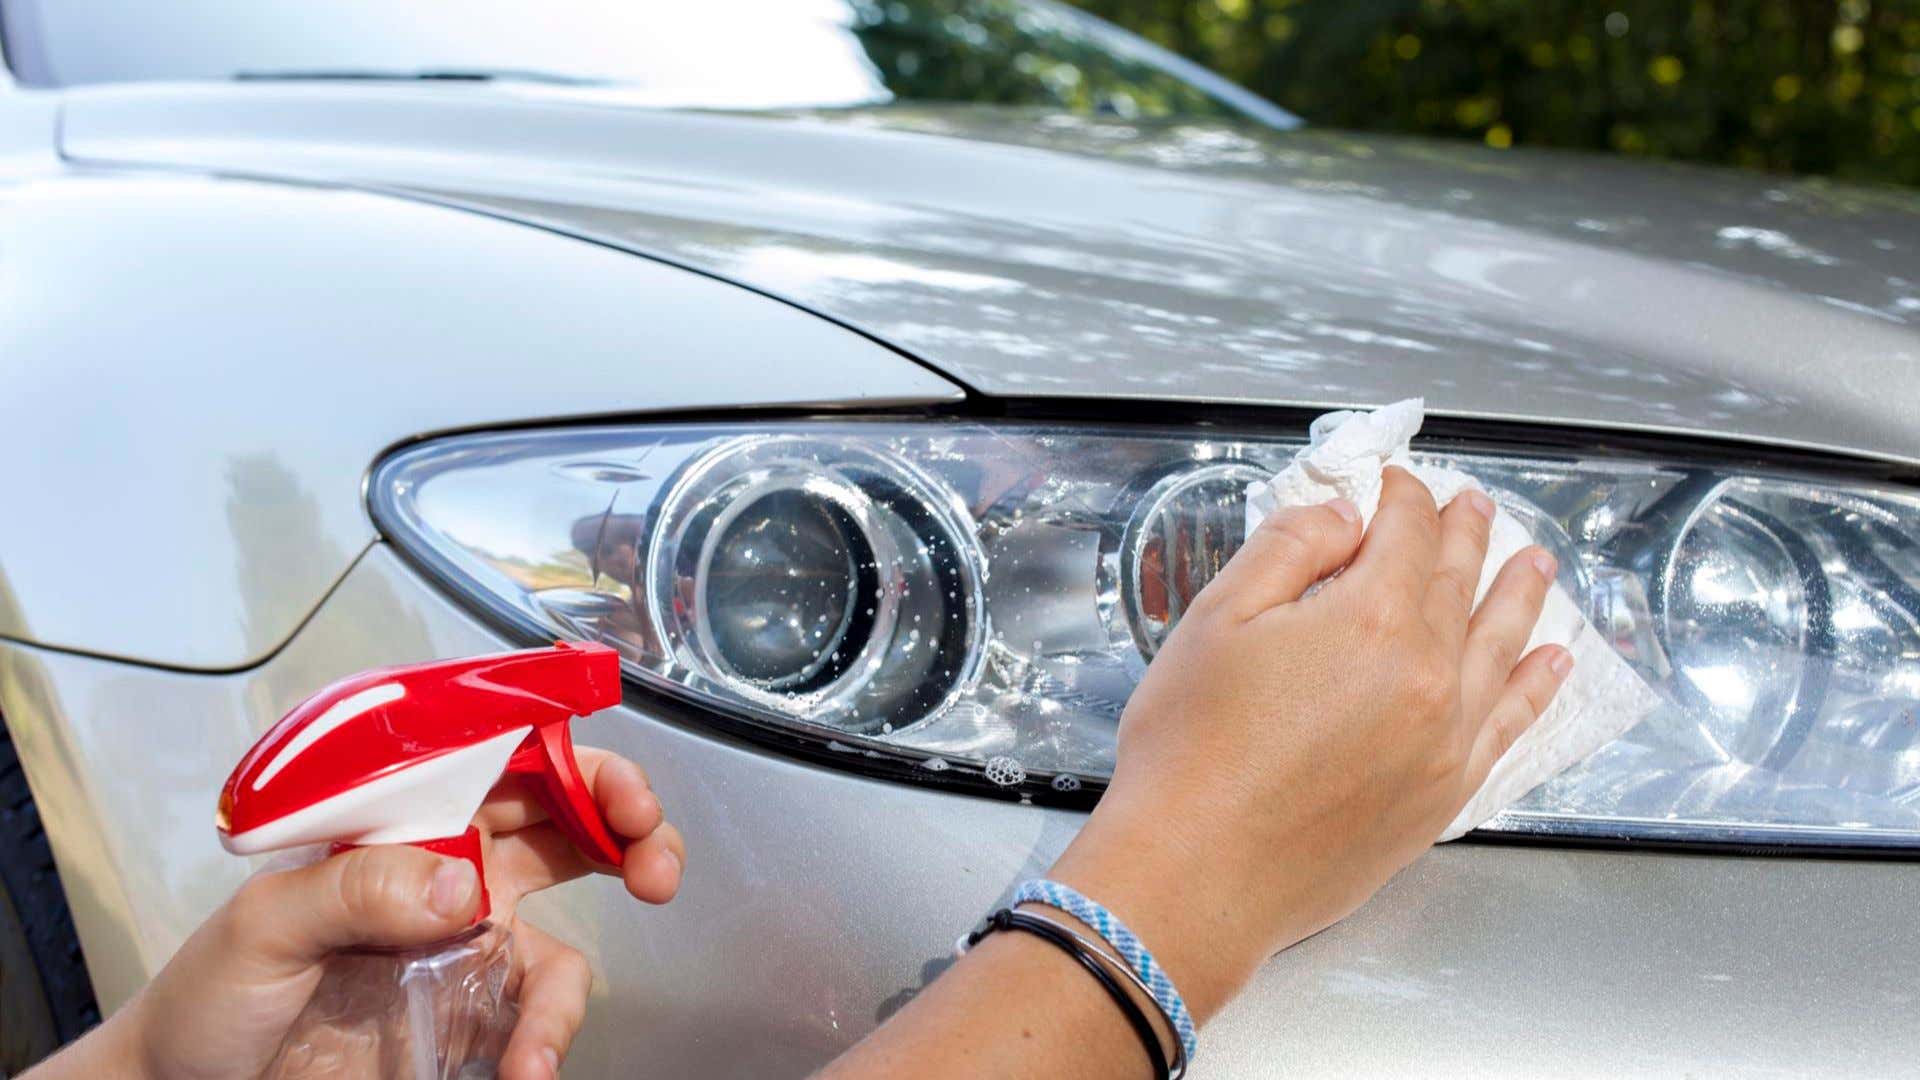 How To Clean Headlights In Easy Steps